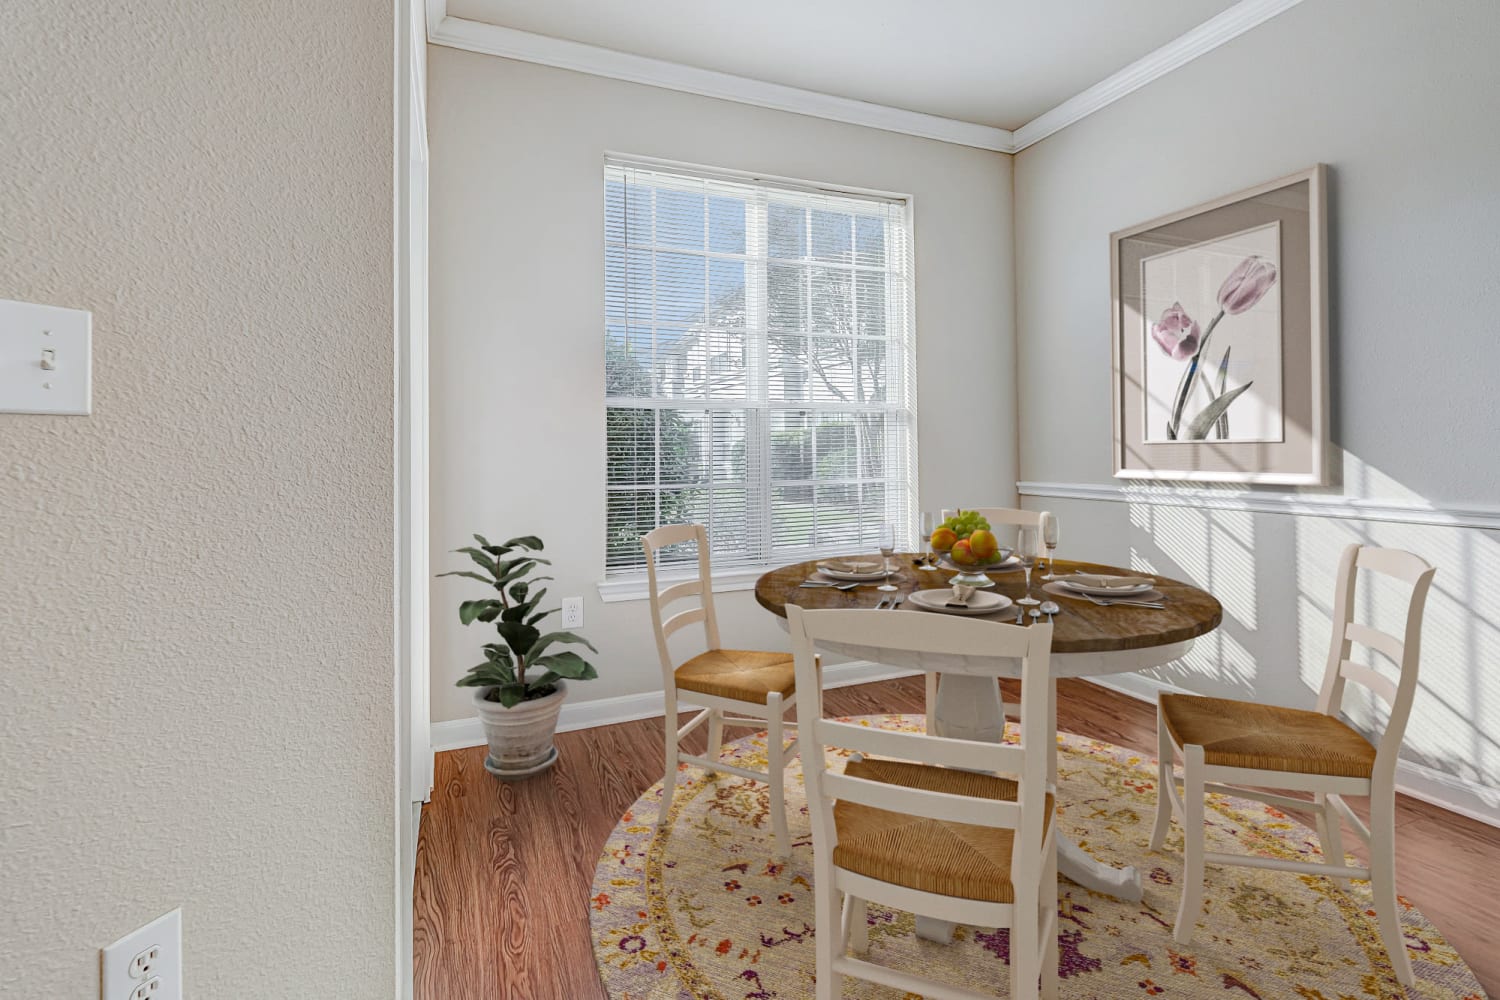 Dining area with large windows at Chateau des Lions Apartment Homes in Lafayette, Louisiana